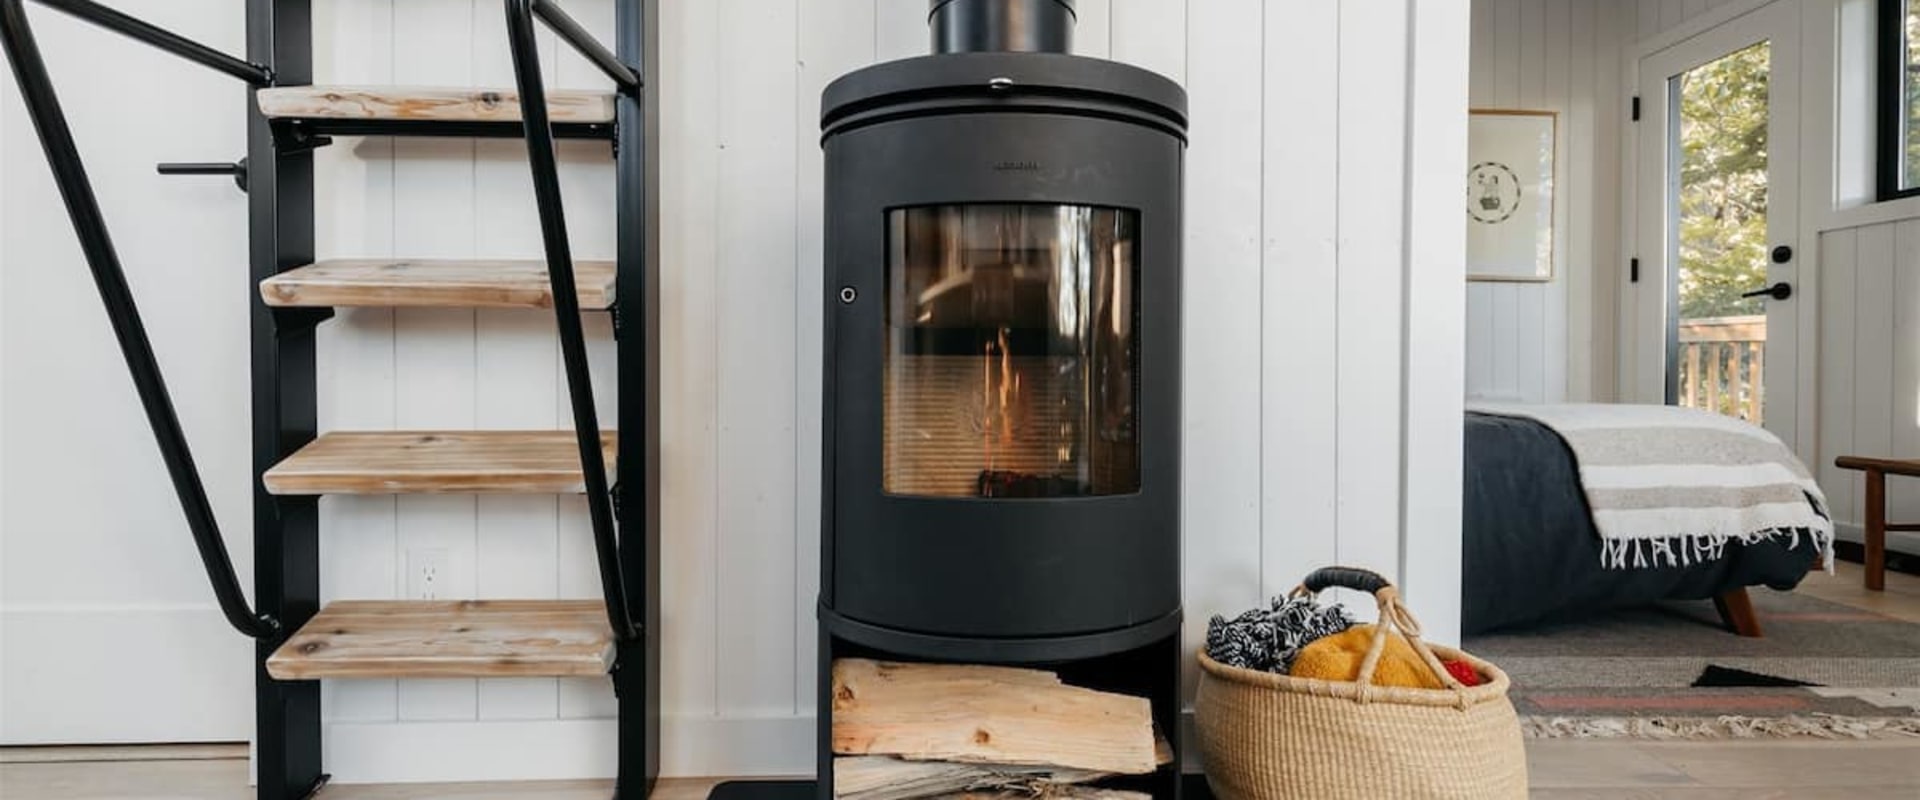 Can a wood stove heat a two story house?